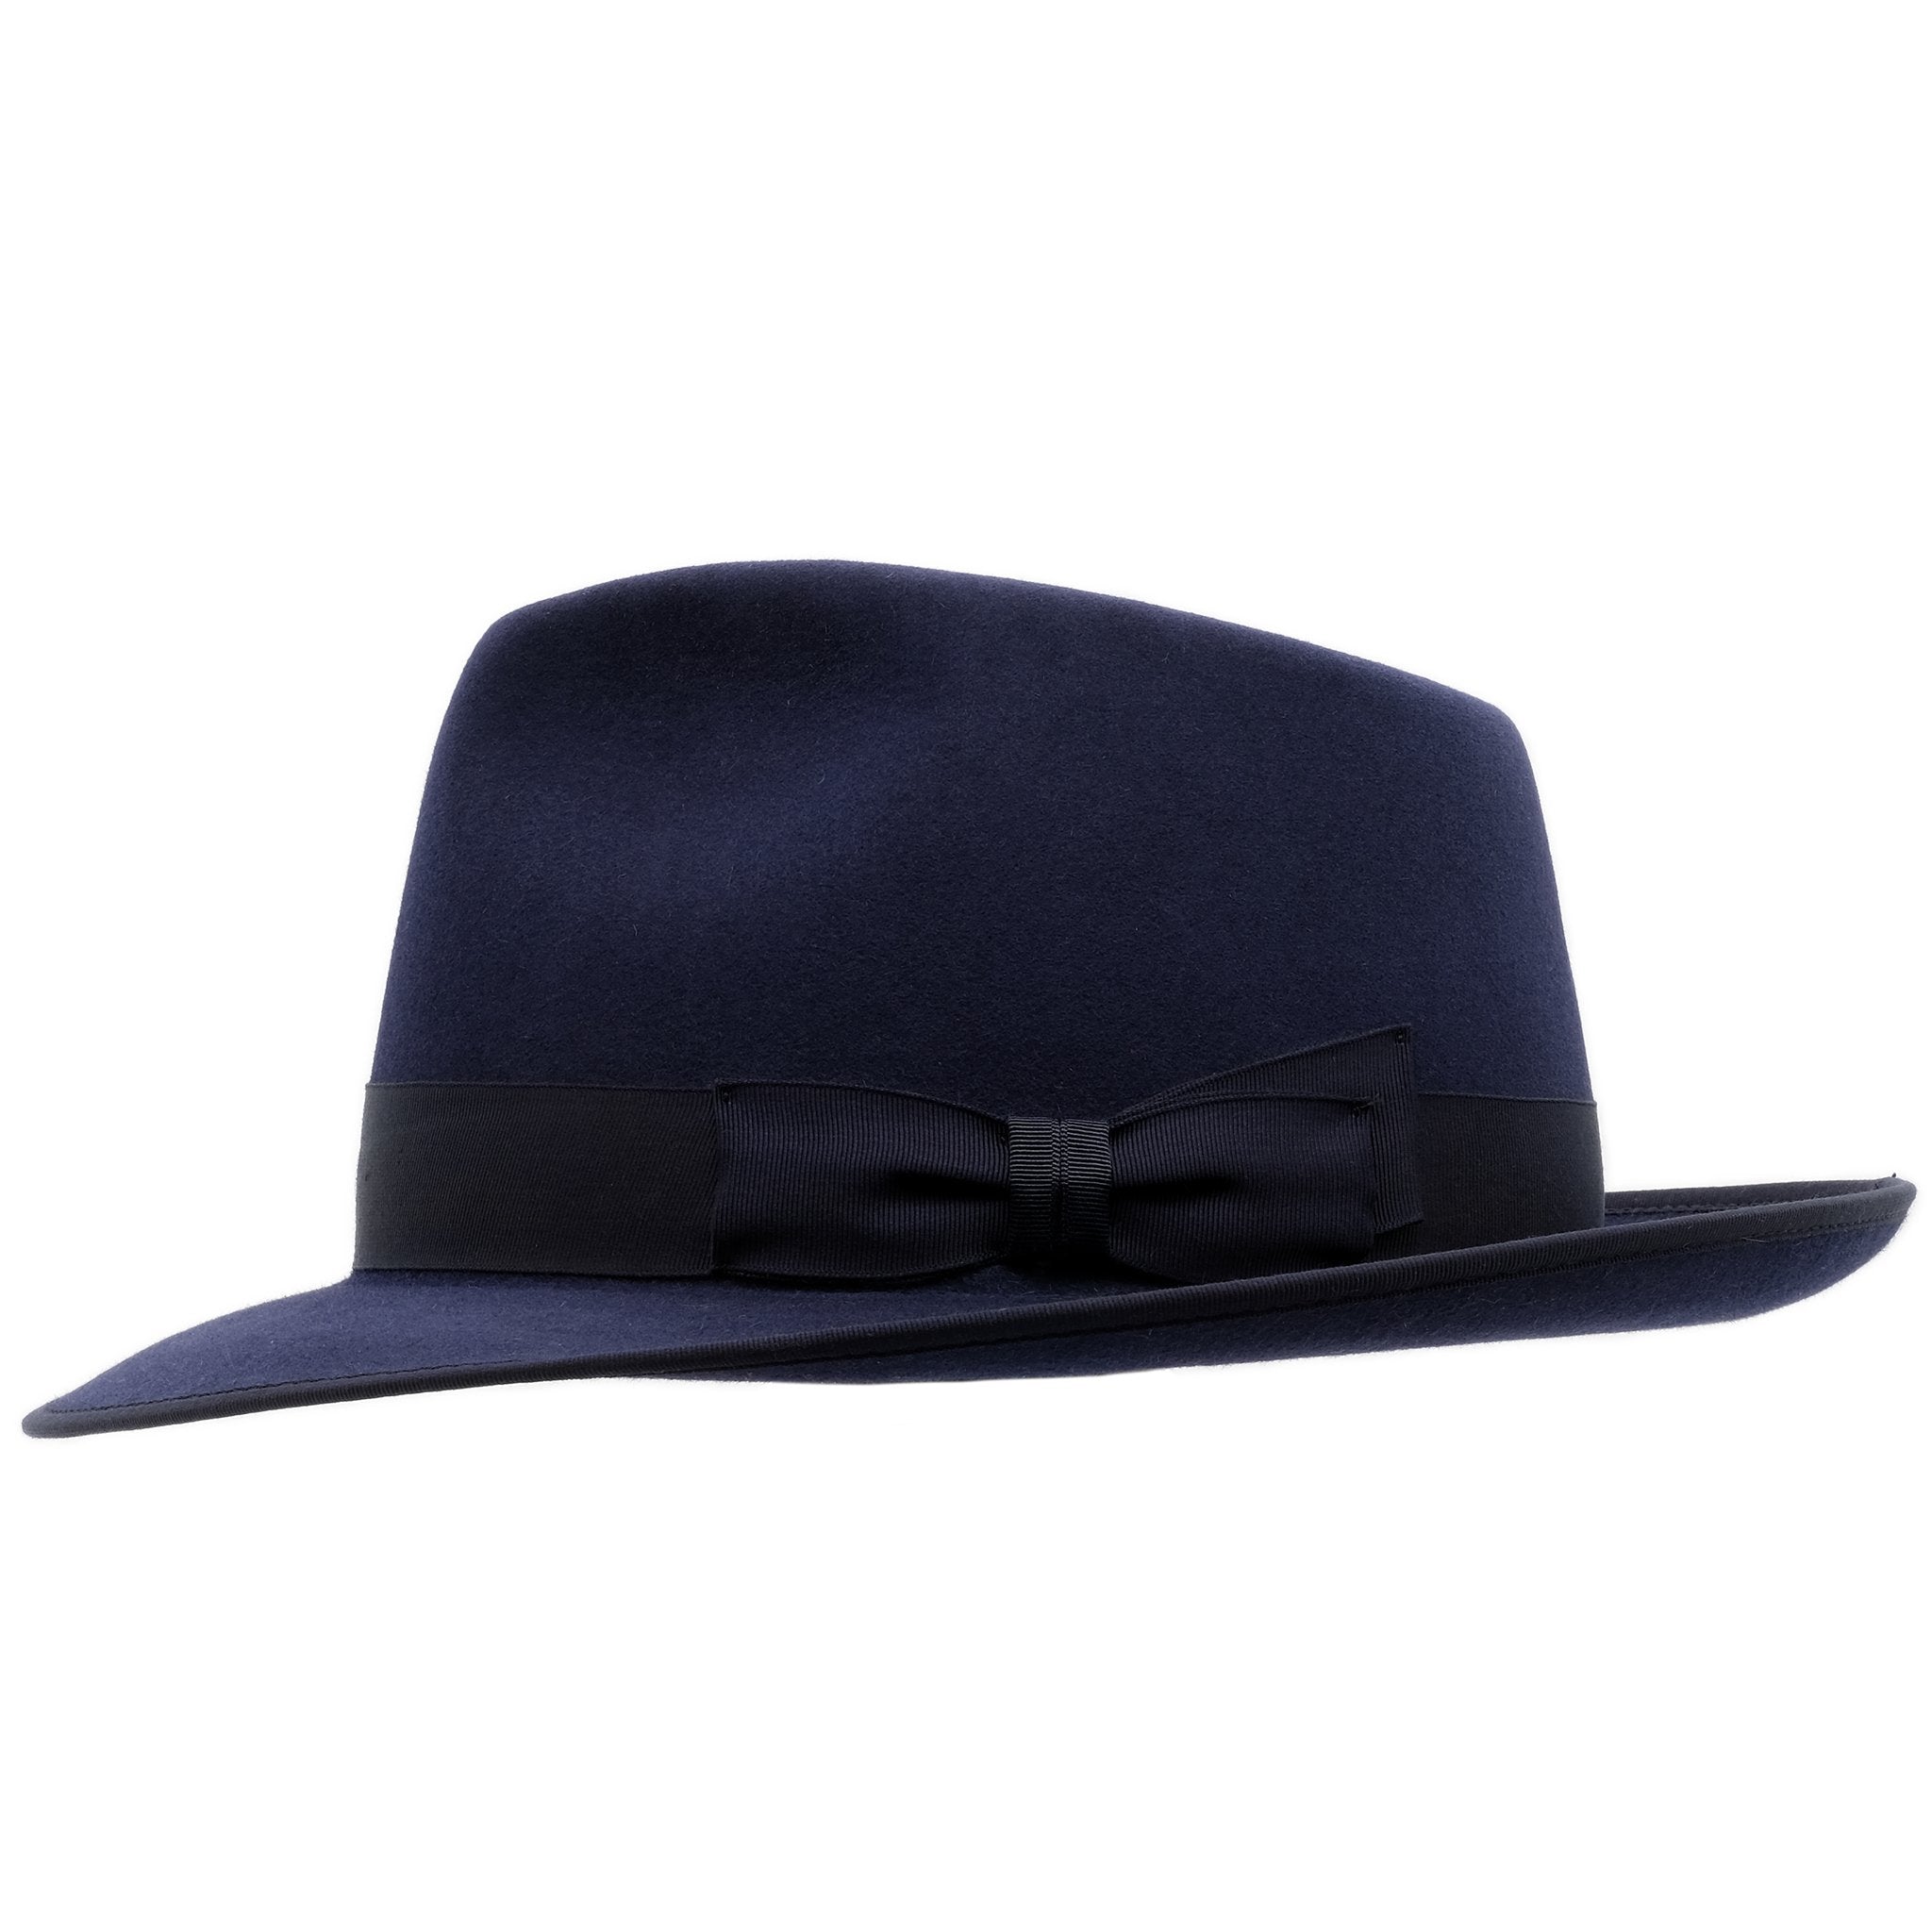 Side view of akubra Stylemaster hat in Federation Navy colour